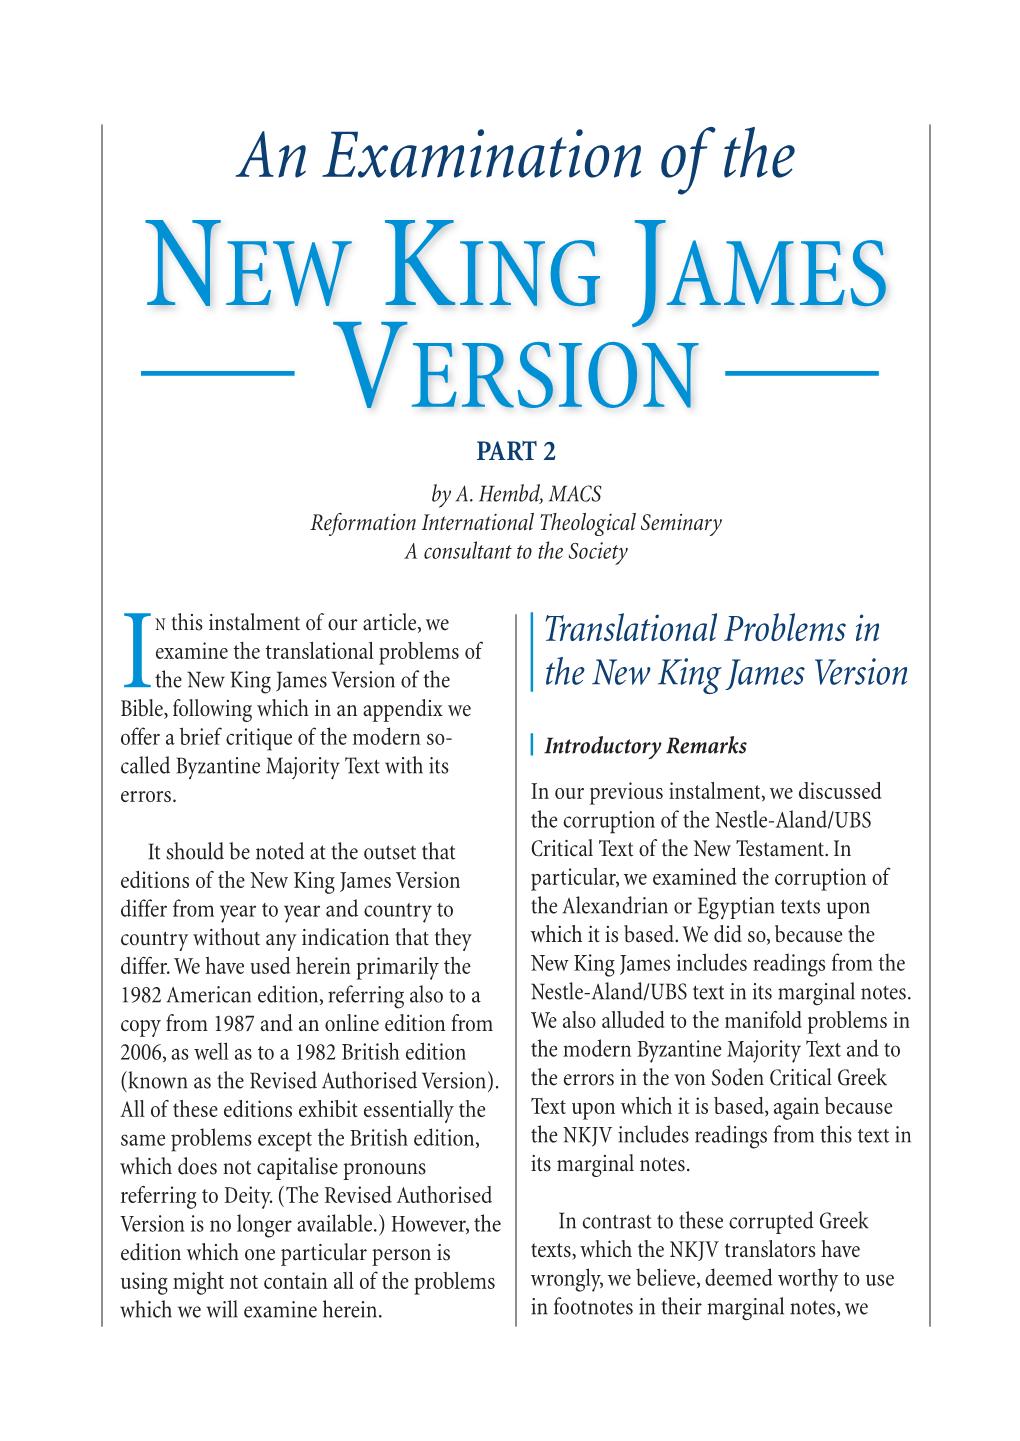 An Examination of the New King James Version, Part 2